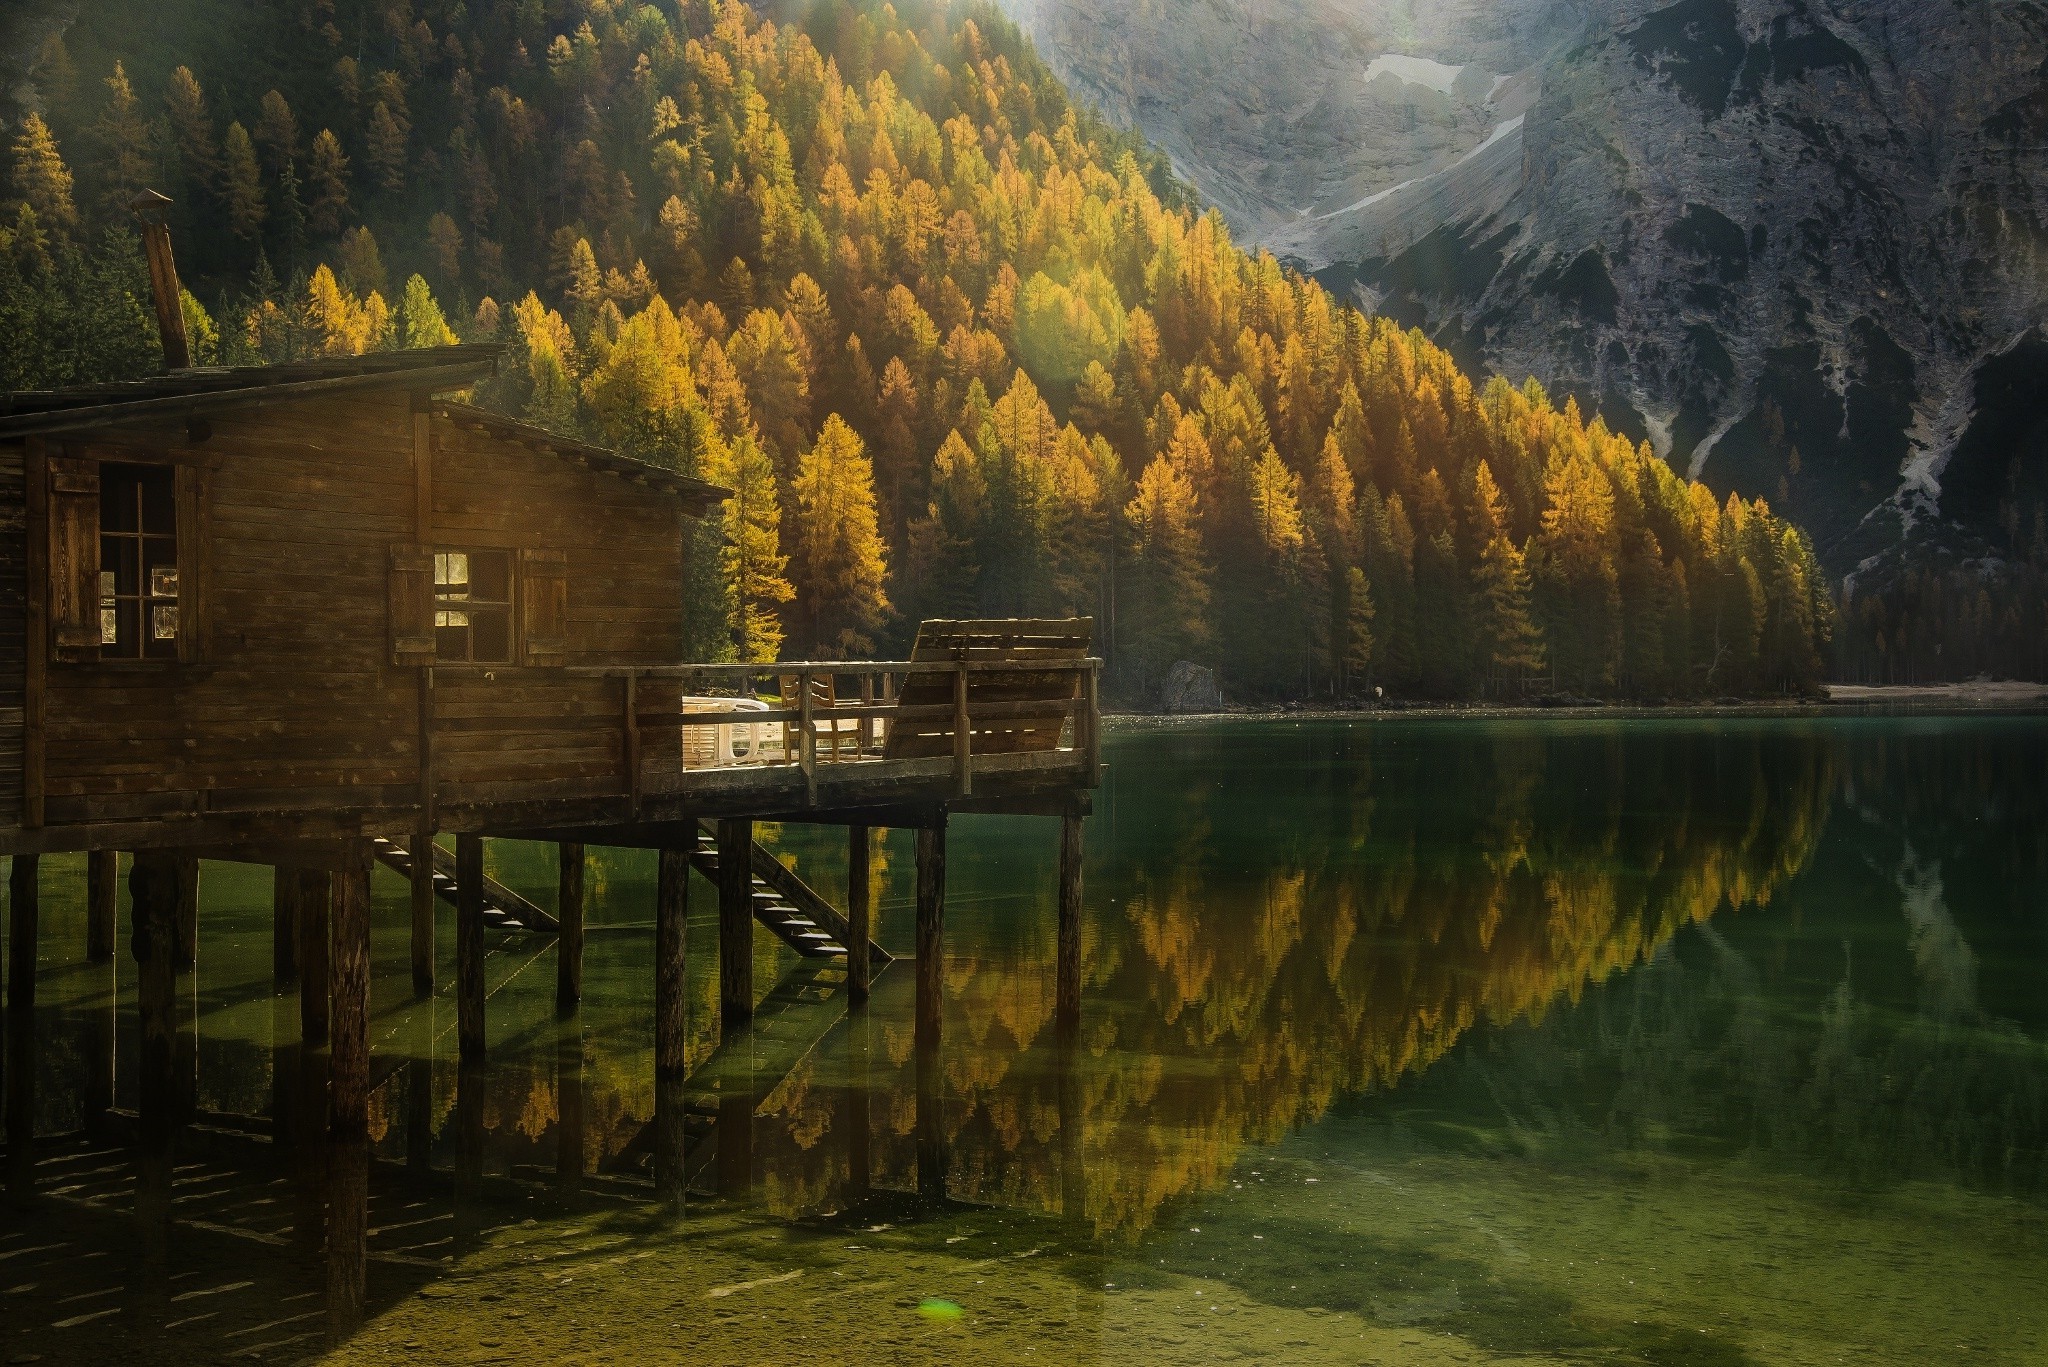 landscape, Nature, Fall, Forest, Mountain, Lake, Cabin, Reflection, Sunlight, Italy Wallpaper